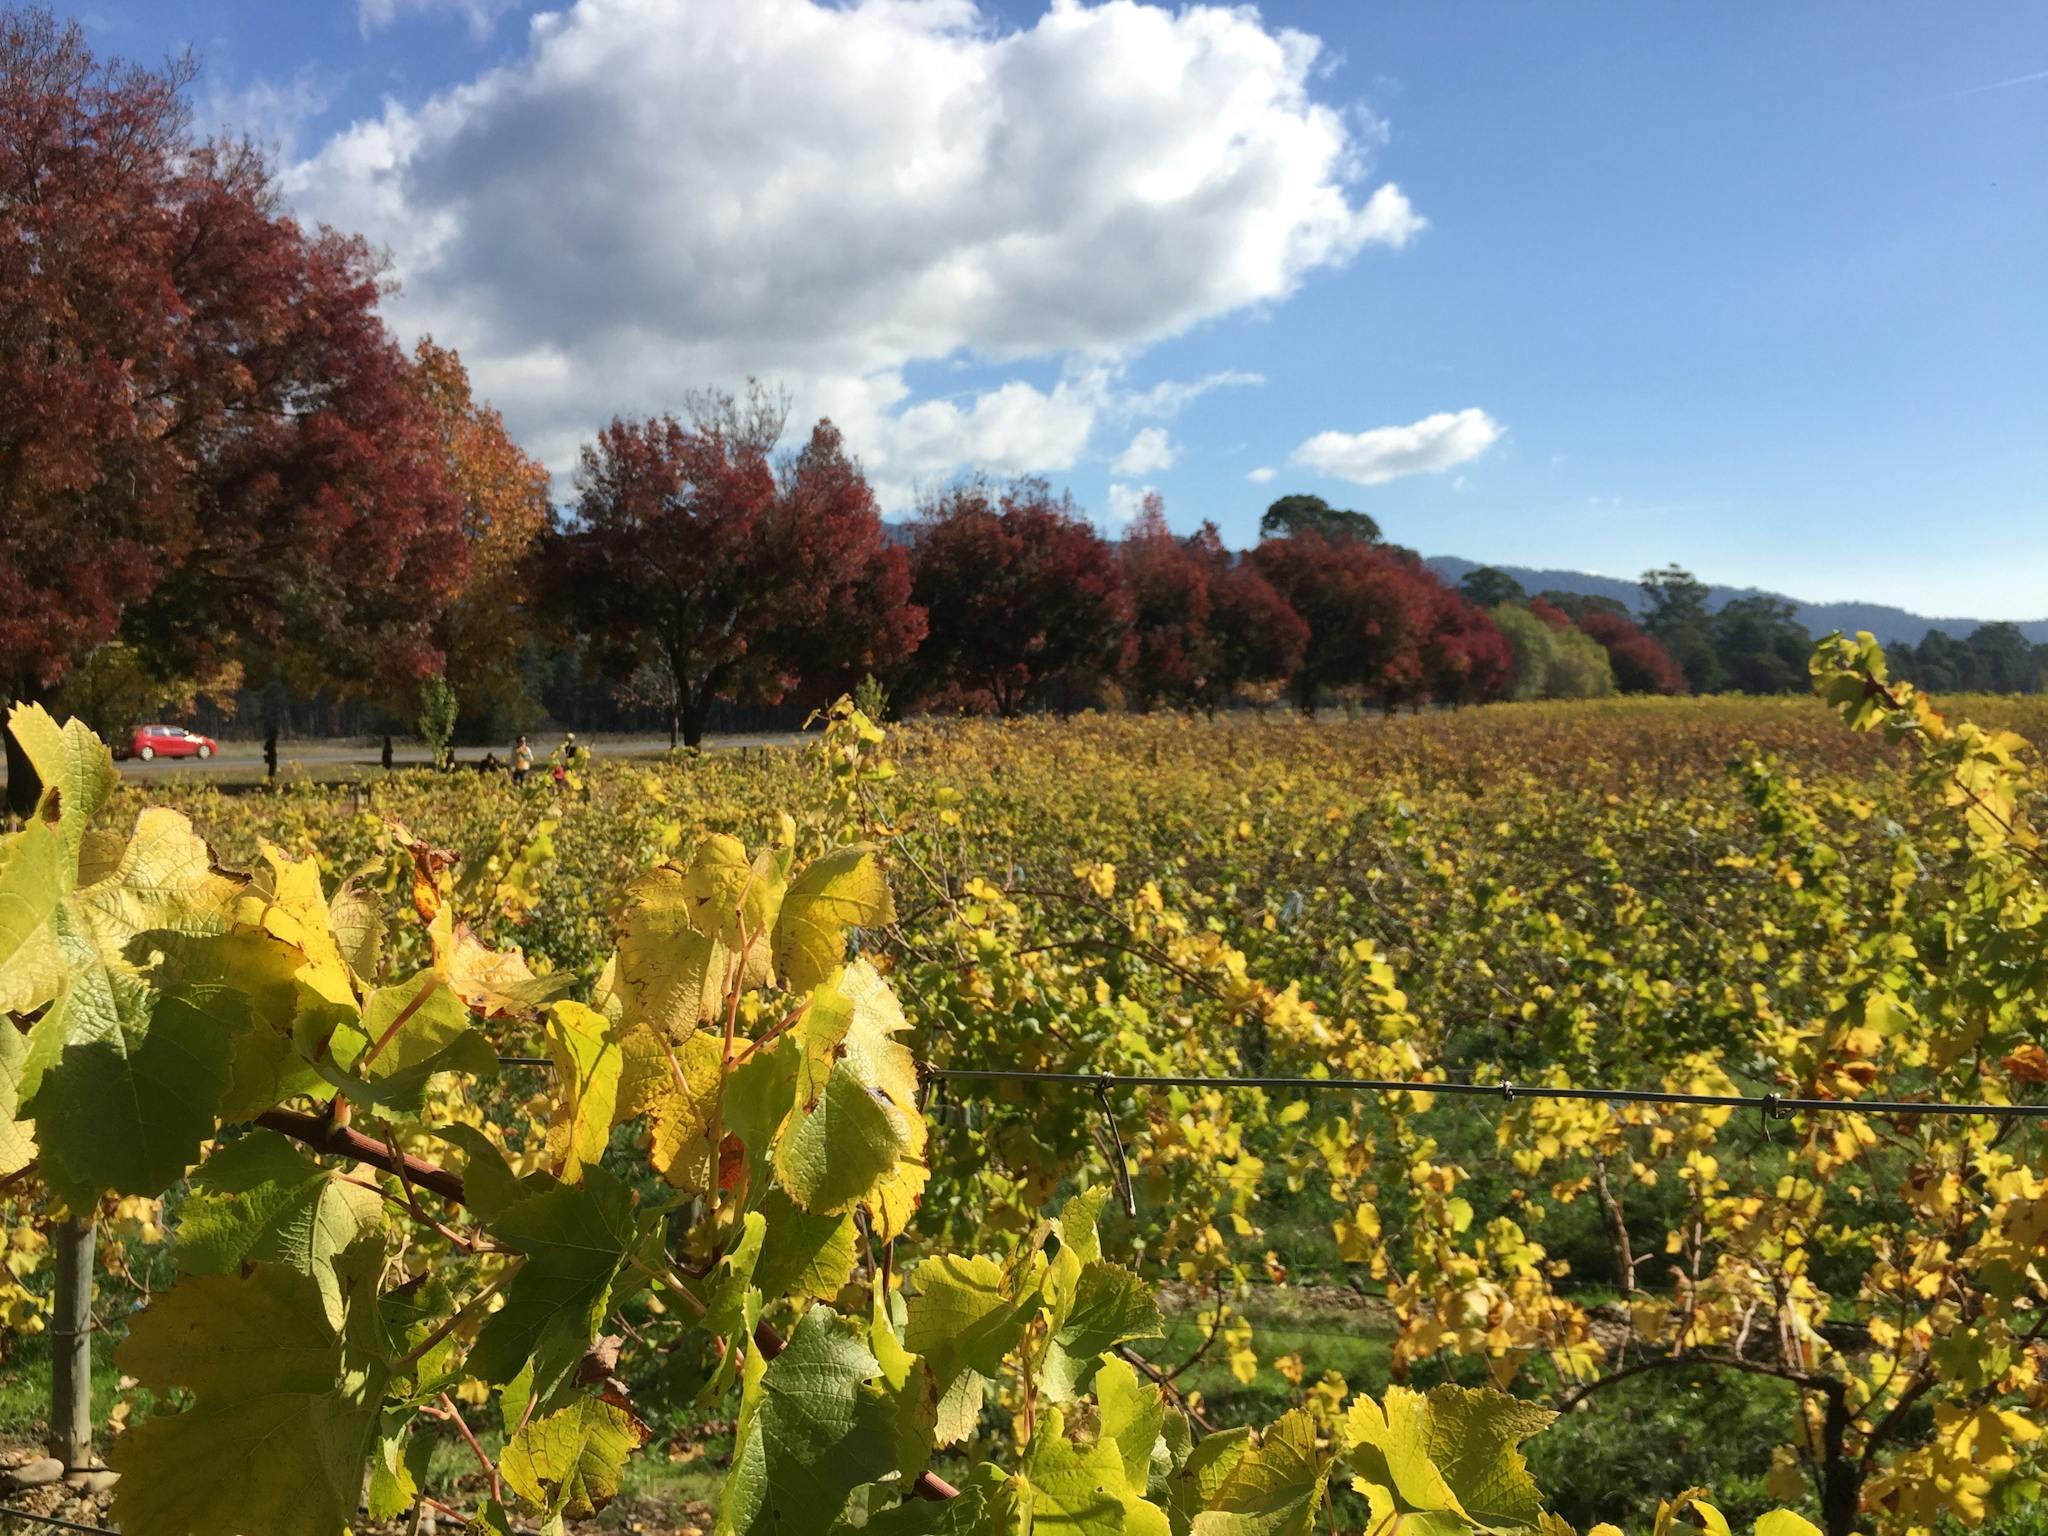 Autumn leaves in the vineyard